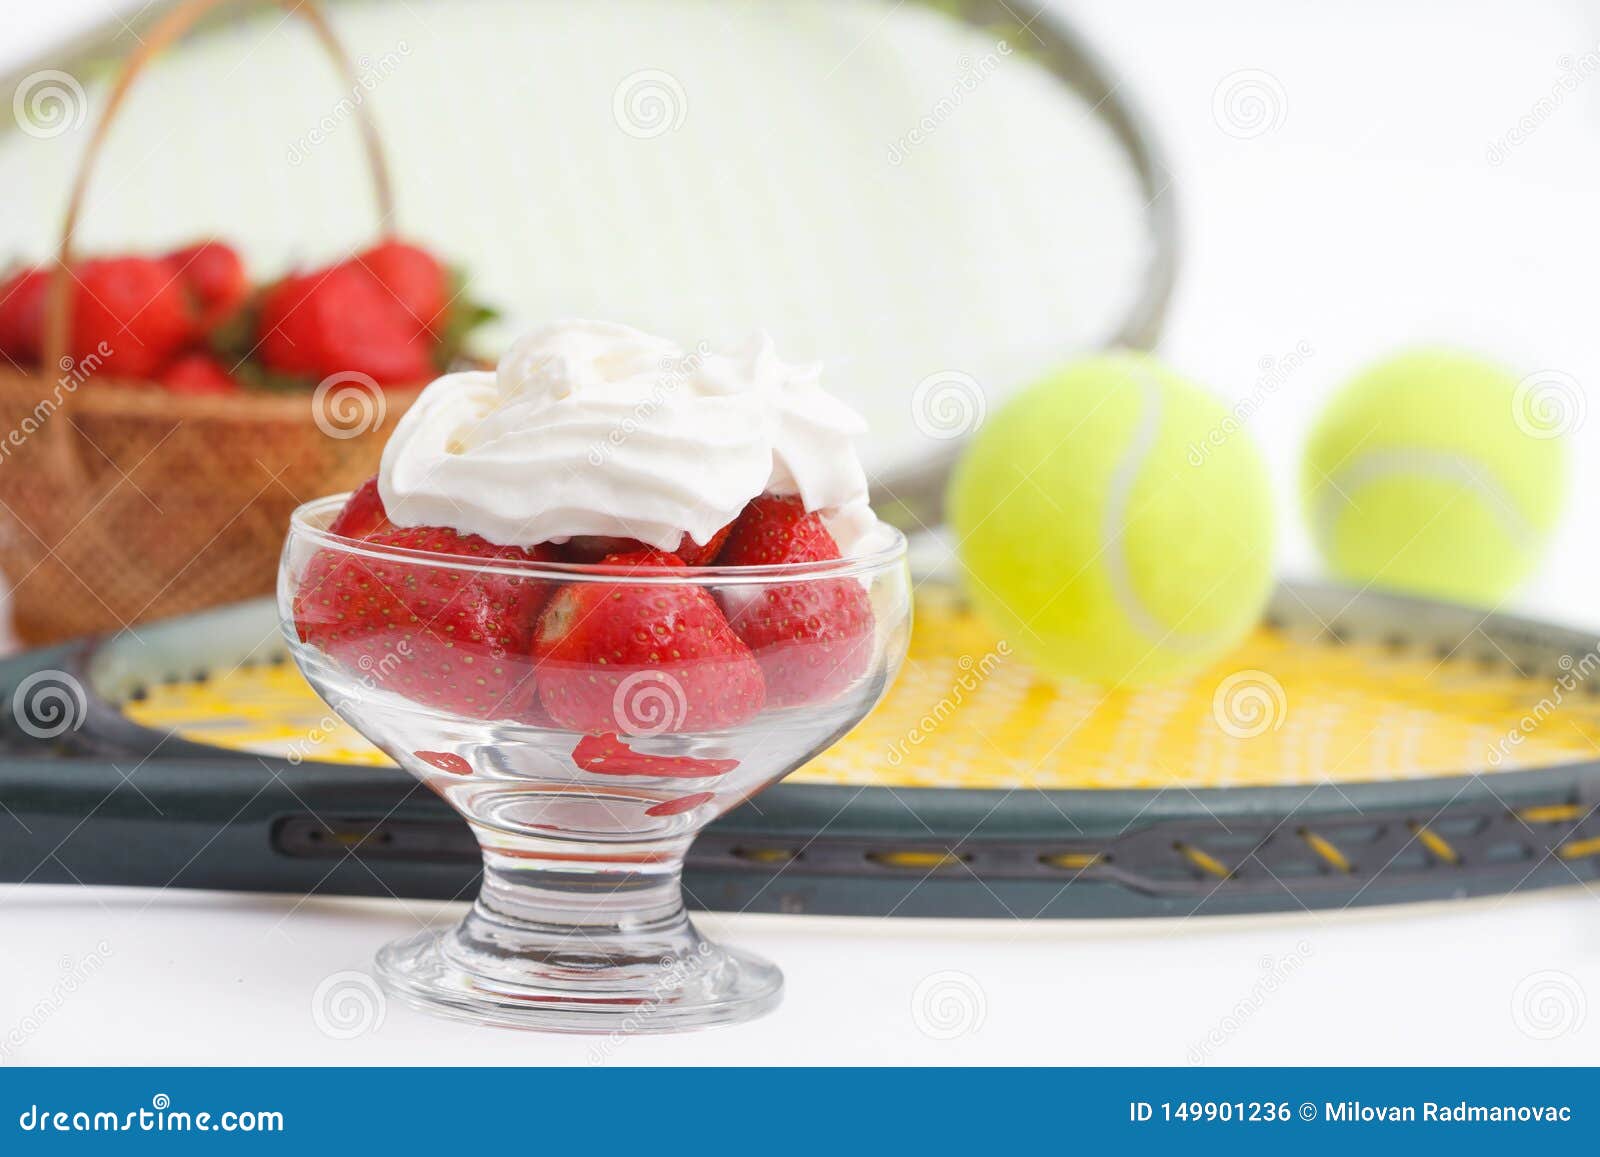 strawberries with whipped cream and  tennis equipment on wimbledon tournament.